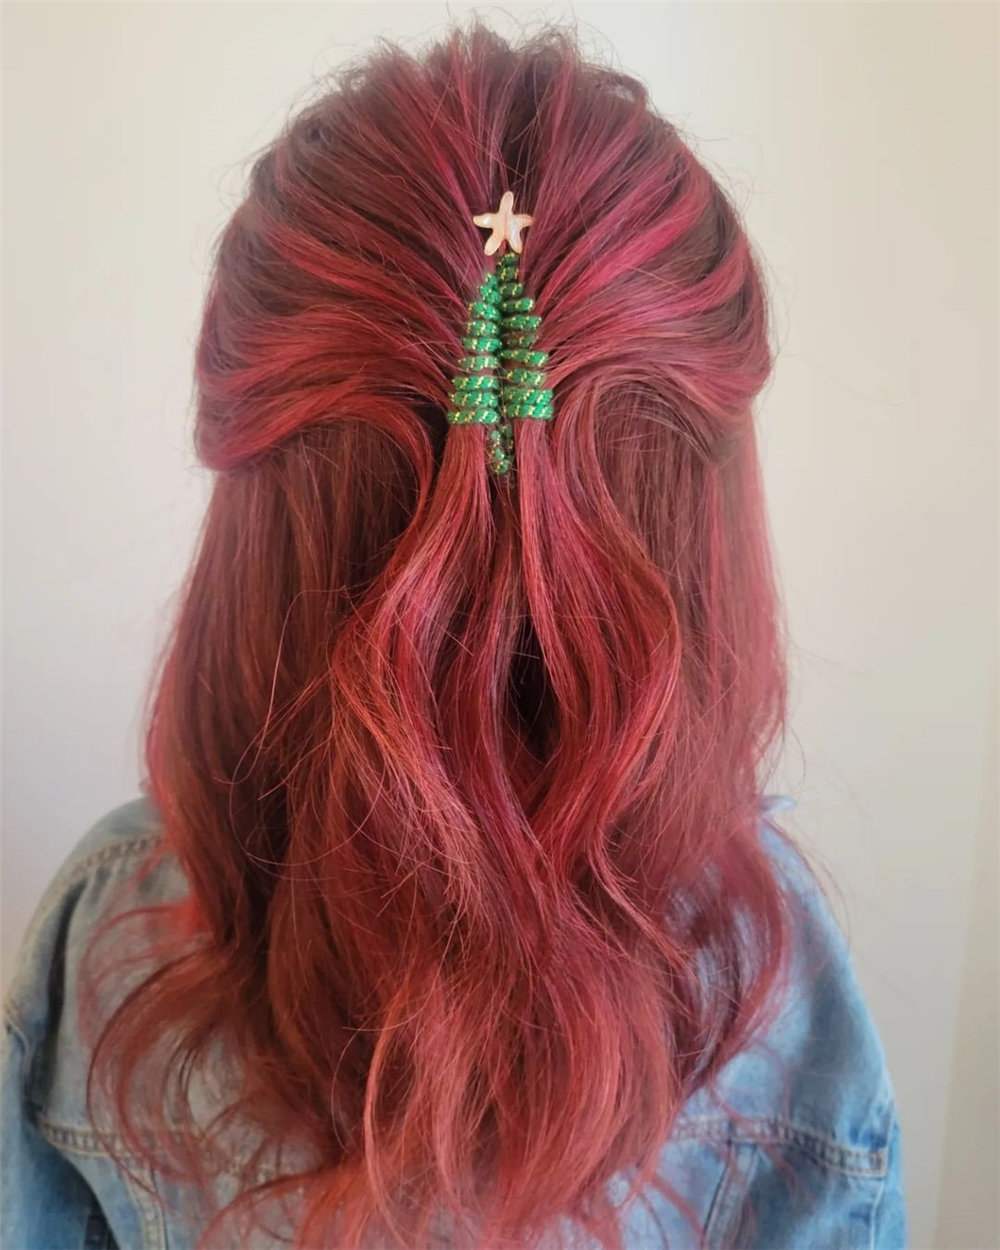 30 Christmas Hairstyle Ideas to Inspire You Holiday Season